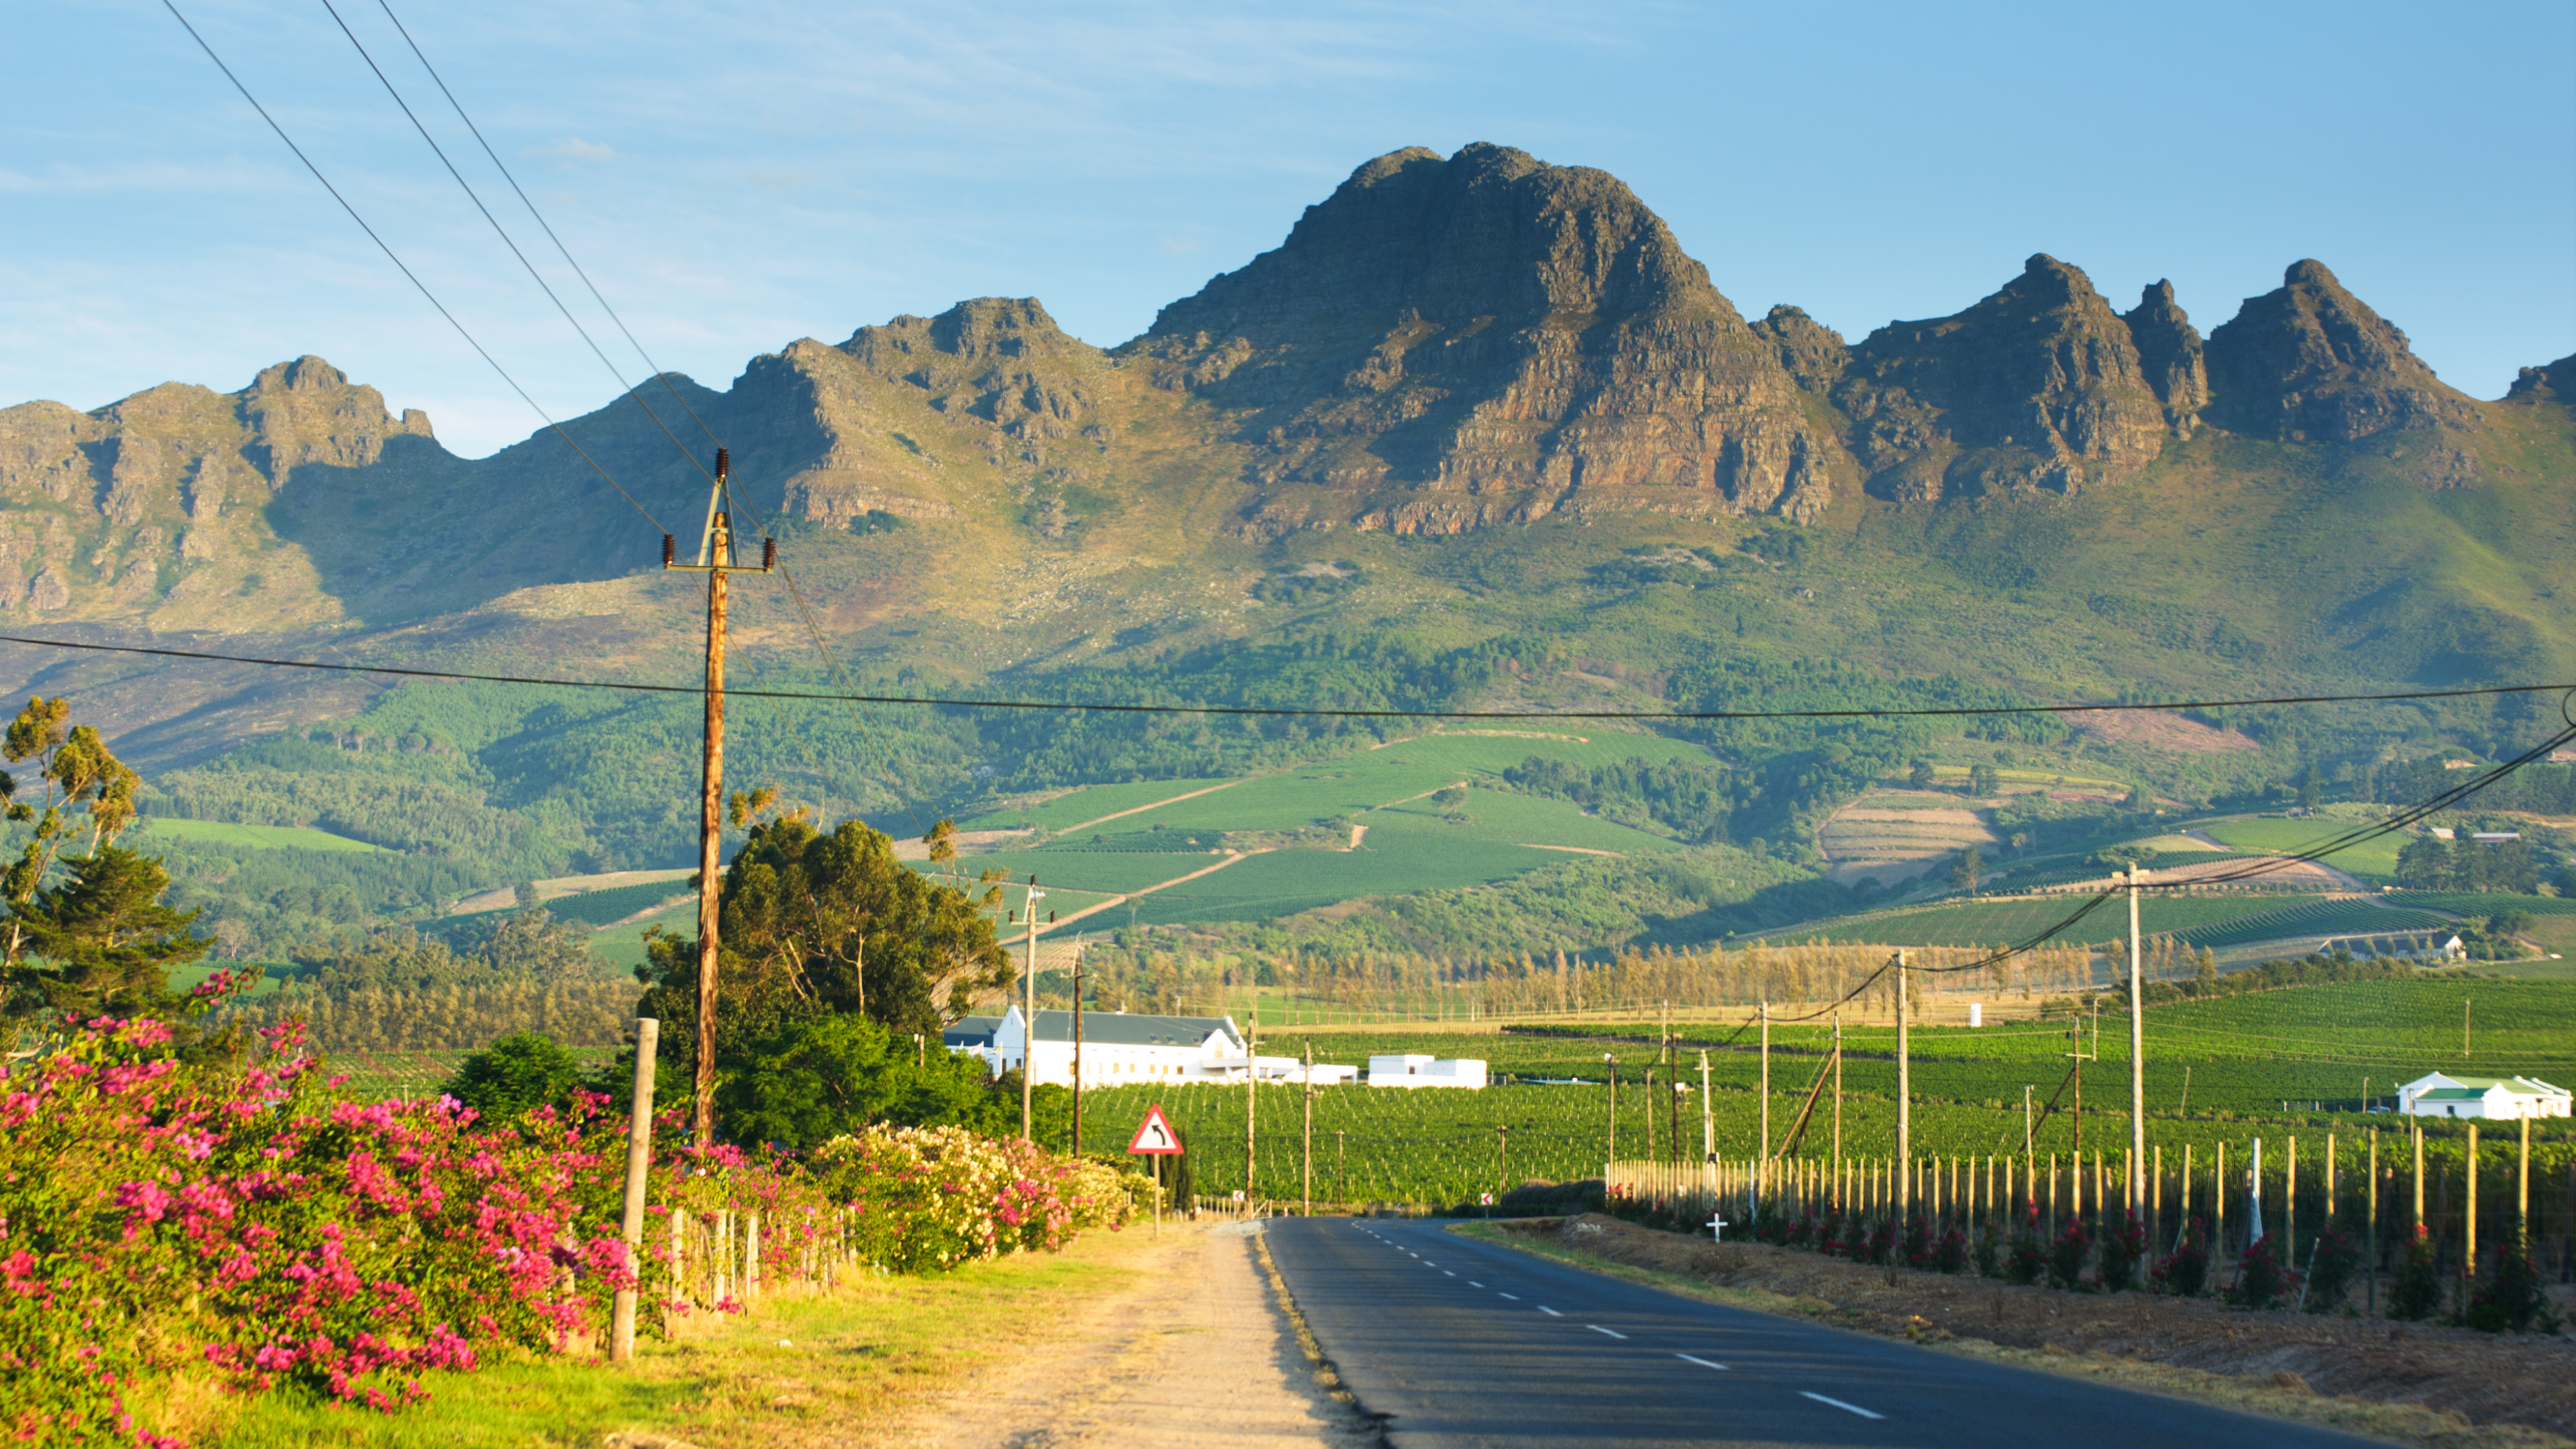 photo-mountains-streets-cape-winelands-Cape-winelands-accomodation-tour-operator-cape-town-into-tours-groot-constantia-city-sightseeing-constantia-valley-paarl-wine-pairing-franschhoek-western-cape-franschhoek-wine-farms-wine-estates-cape-town-wine-south-africa-stellenbosch-wine-route
Vineyards-mountains-jonkershoek-simonsig-dorp-street-university-cape-town-wine-tasting-western-cape-winelands-house-wine-farms-wine-estate-resturant-stellenbosch-accomodation-into-tours-cape-town-wine-tasting-day-tours-private-tours-cape-town-tour-guide
